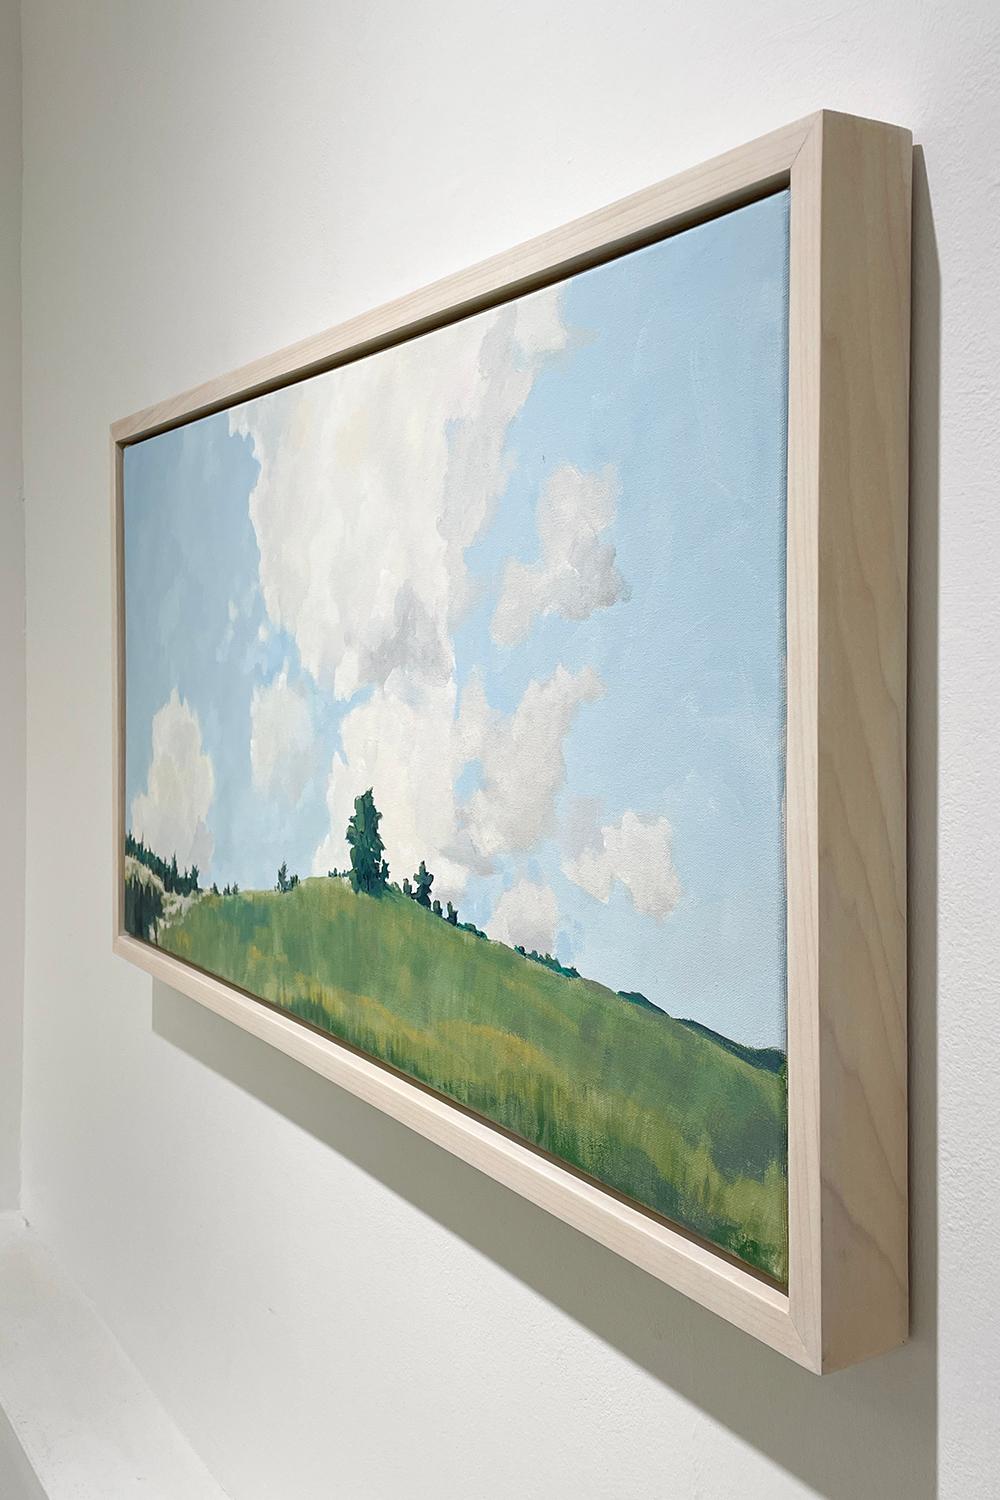 Upper Meadow in June (Contemporary Panoramic Plein Air Landscape Painting) by Joseph Rapp
18 x 36 inches, acrylic on canvas
19.75 x 37.75 inches framed in white stained wood floater frame

 Joseph Rapp’s craftsmanship is apparent in the sense of